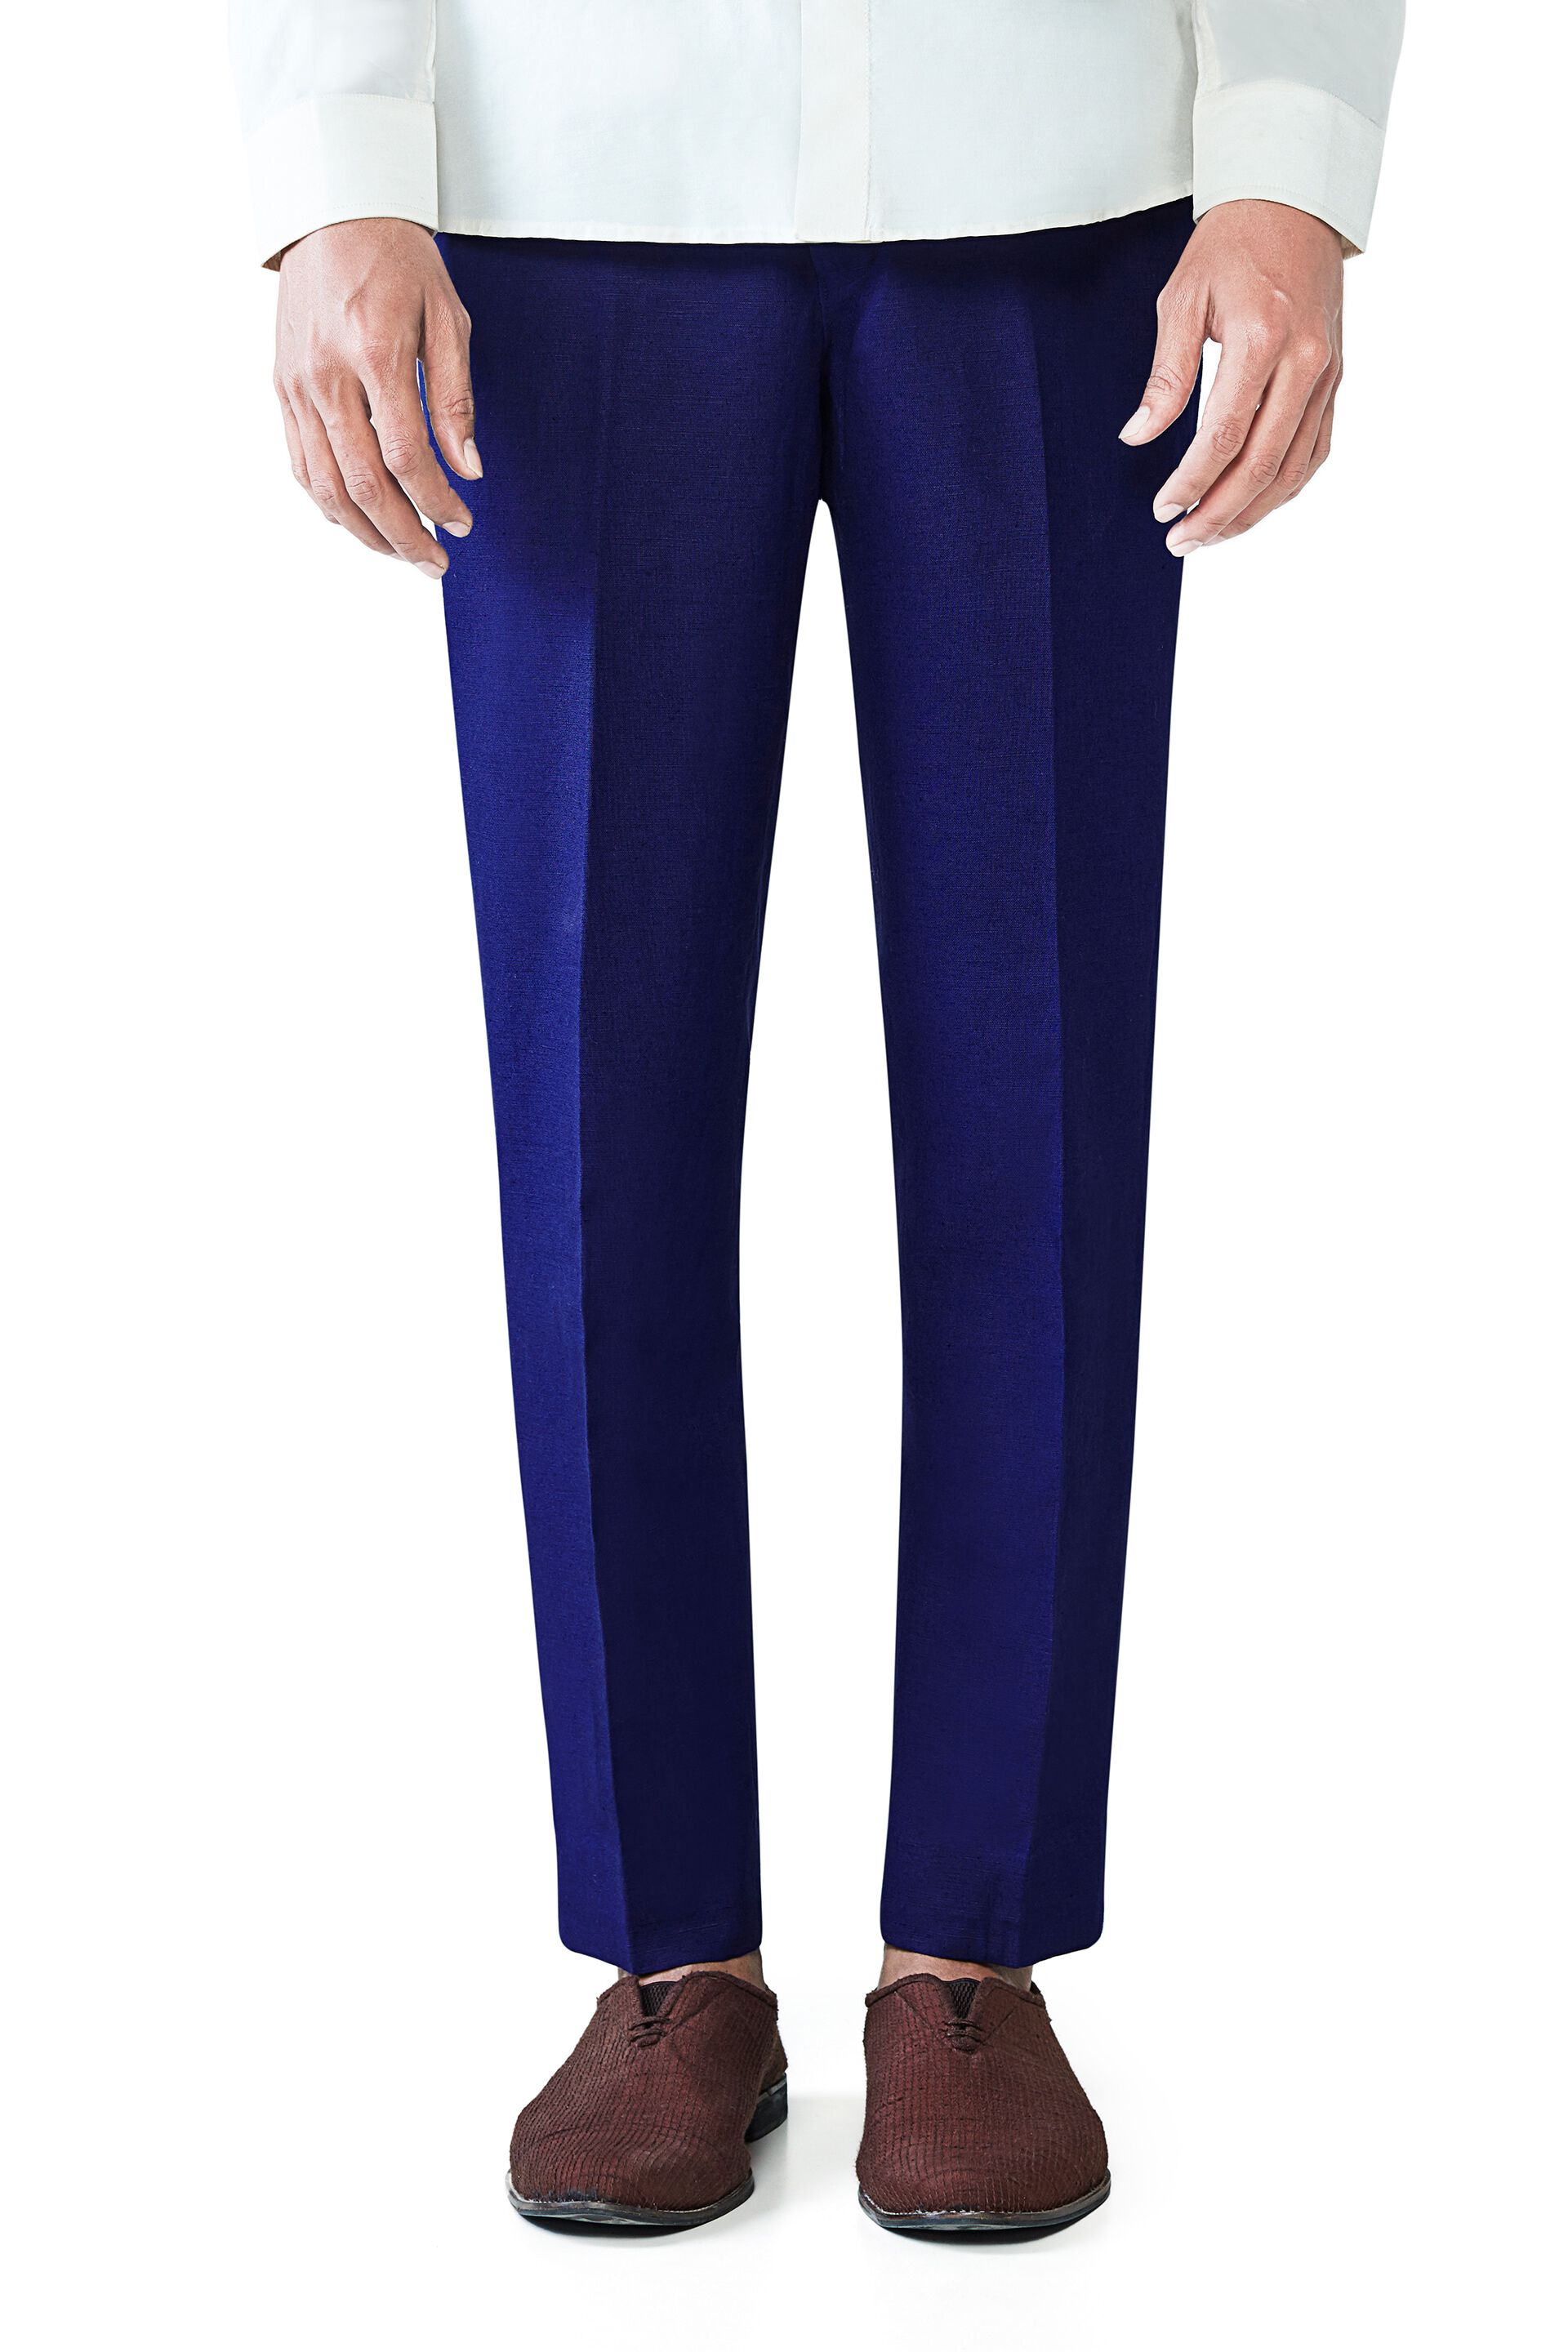 Navy Blue Formal Trouser For Men  Office Wear Pants For Men  Dilutee India